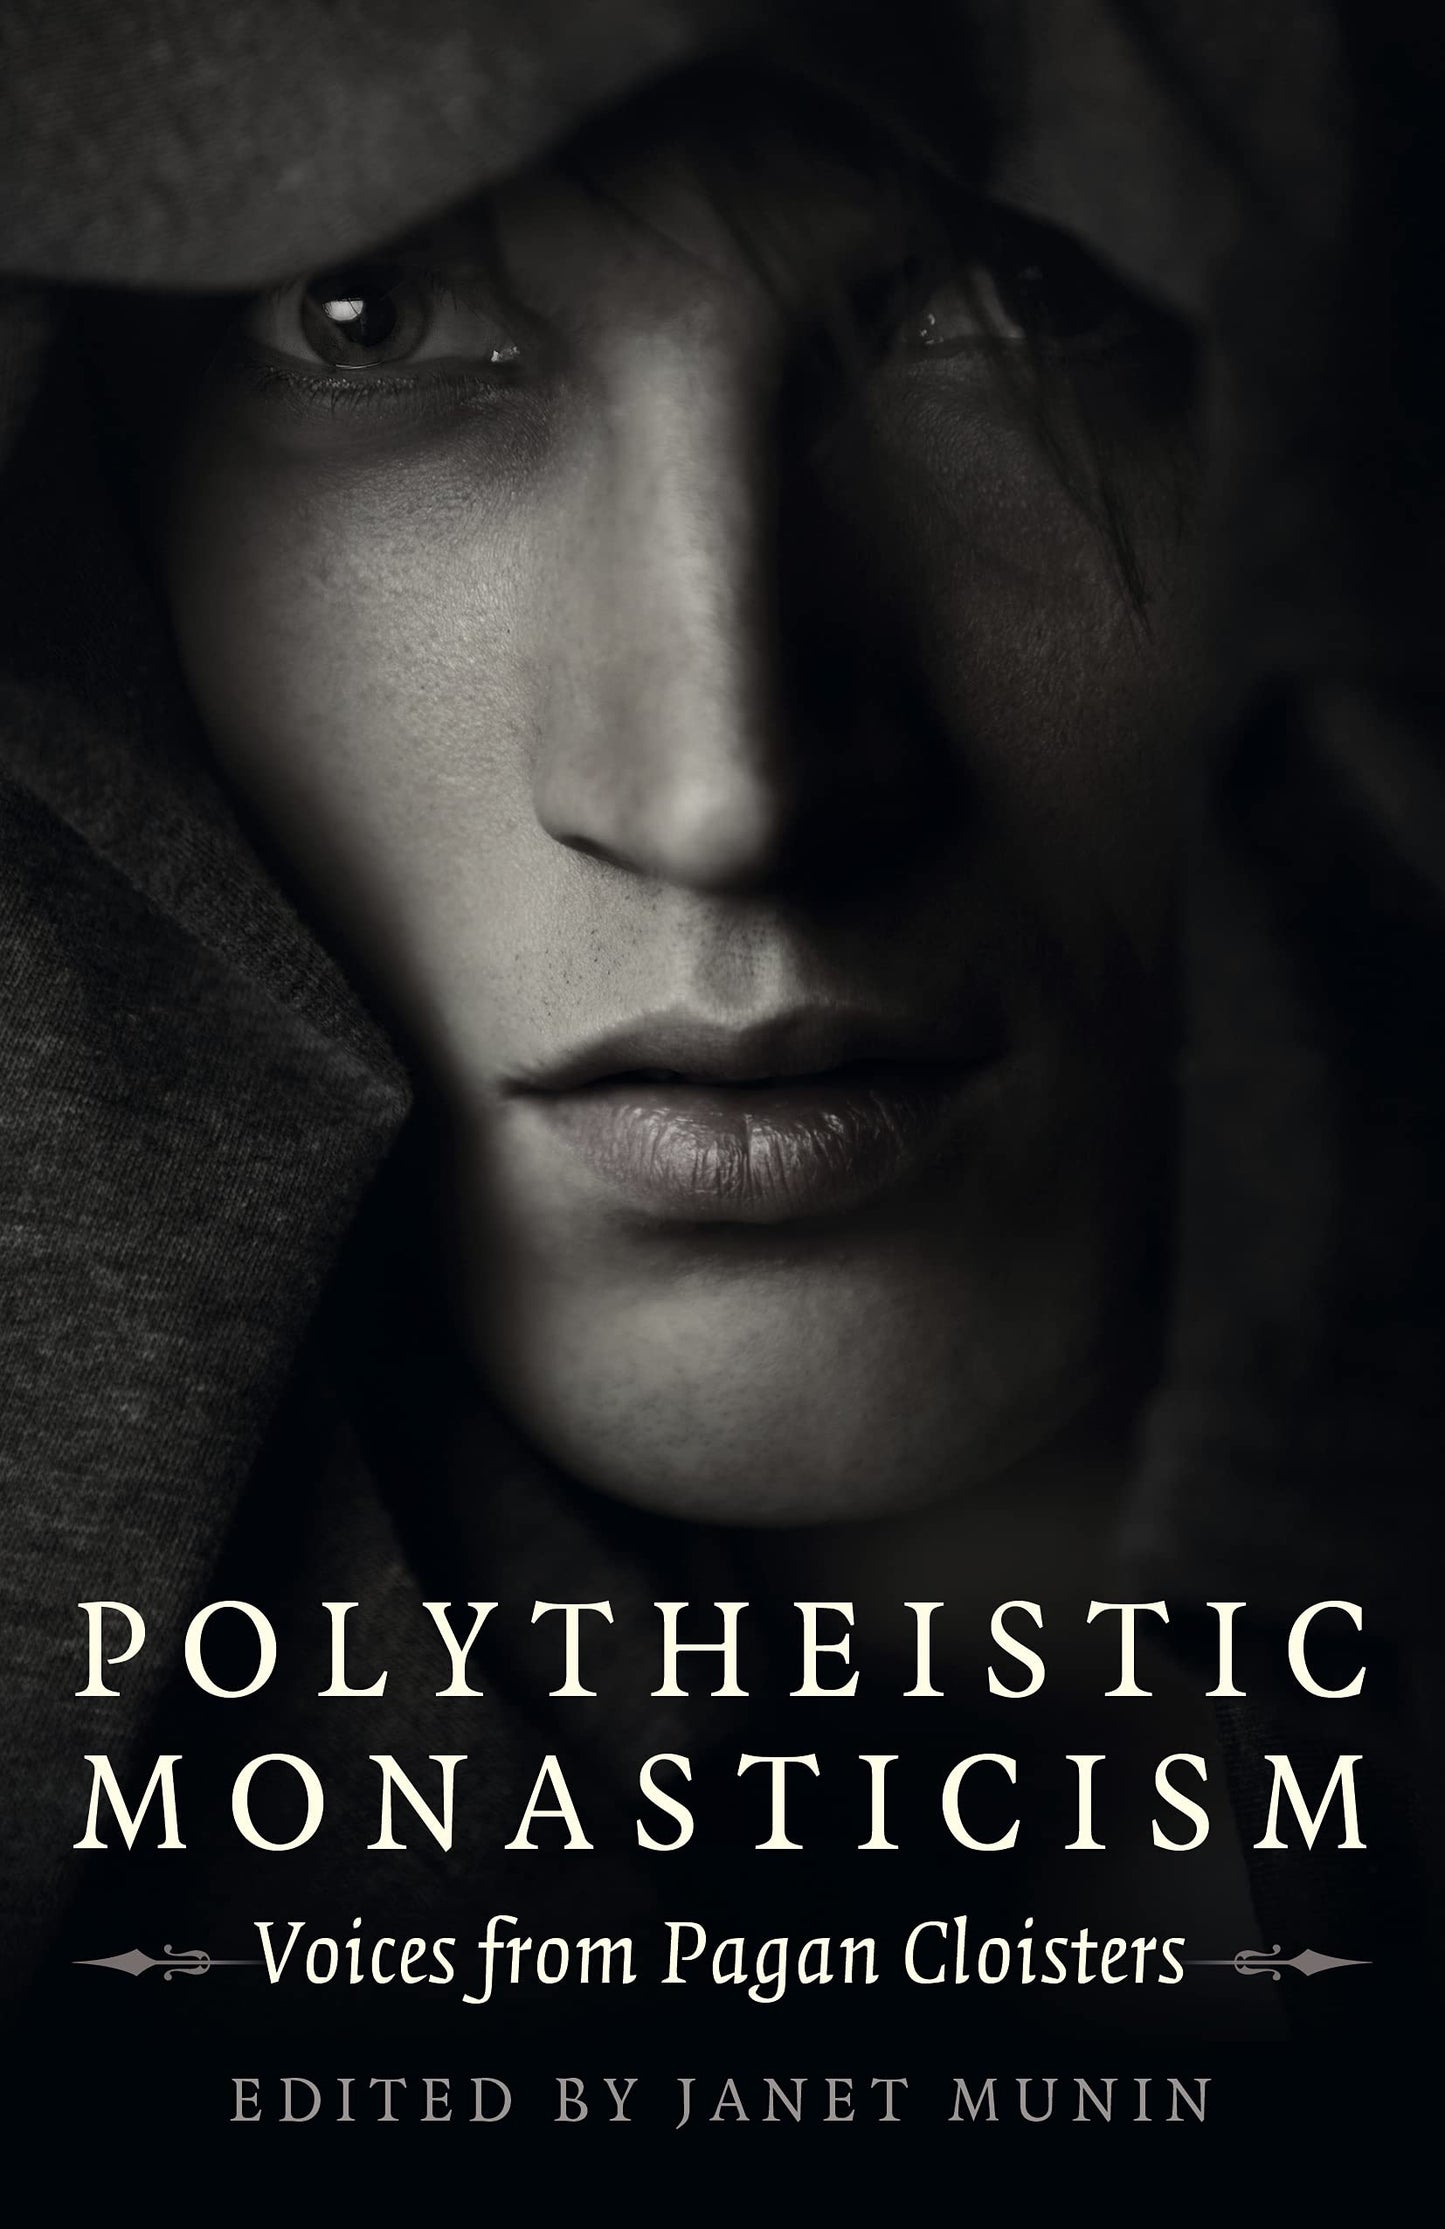 Polytheistic Monasticism - Voices from Pagan Cloisters